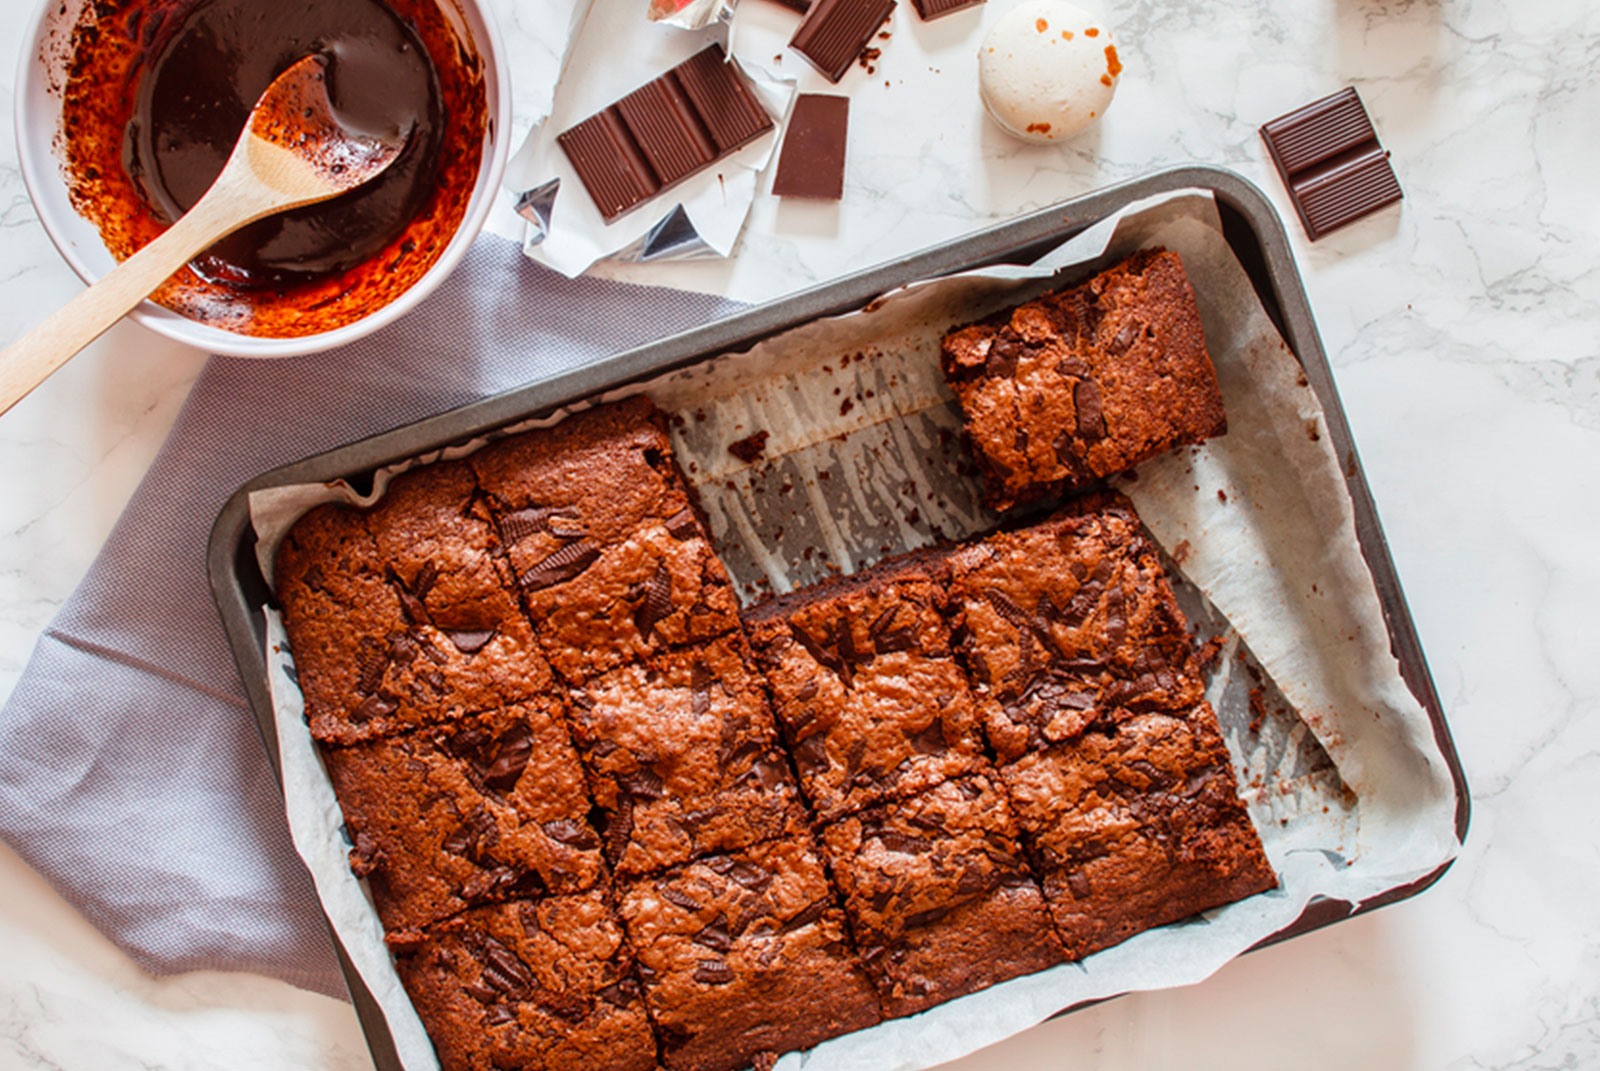 Settle These Food Debates and We’ll Guess Which Three Foods You Love the Most Brownies